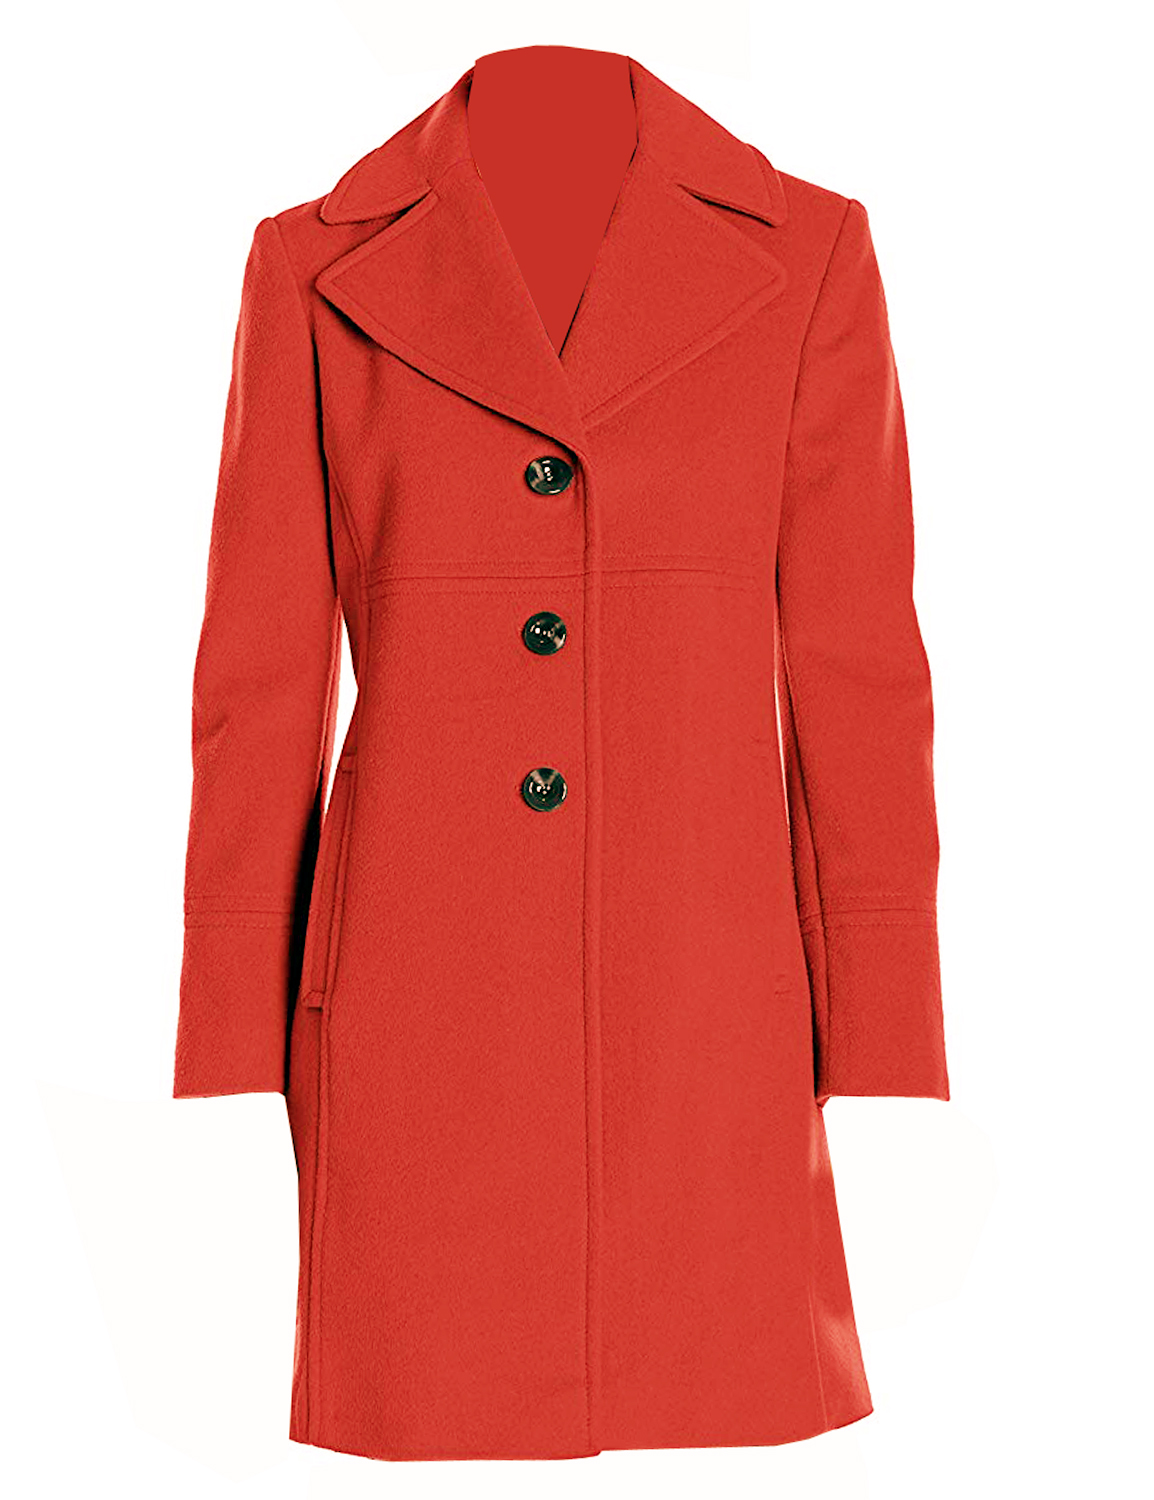 What To Wear With Red Coat | lupon.gov.ph